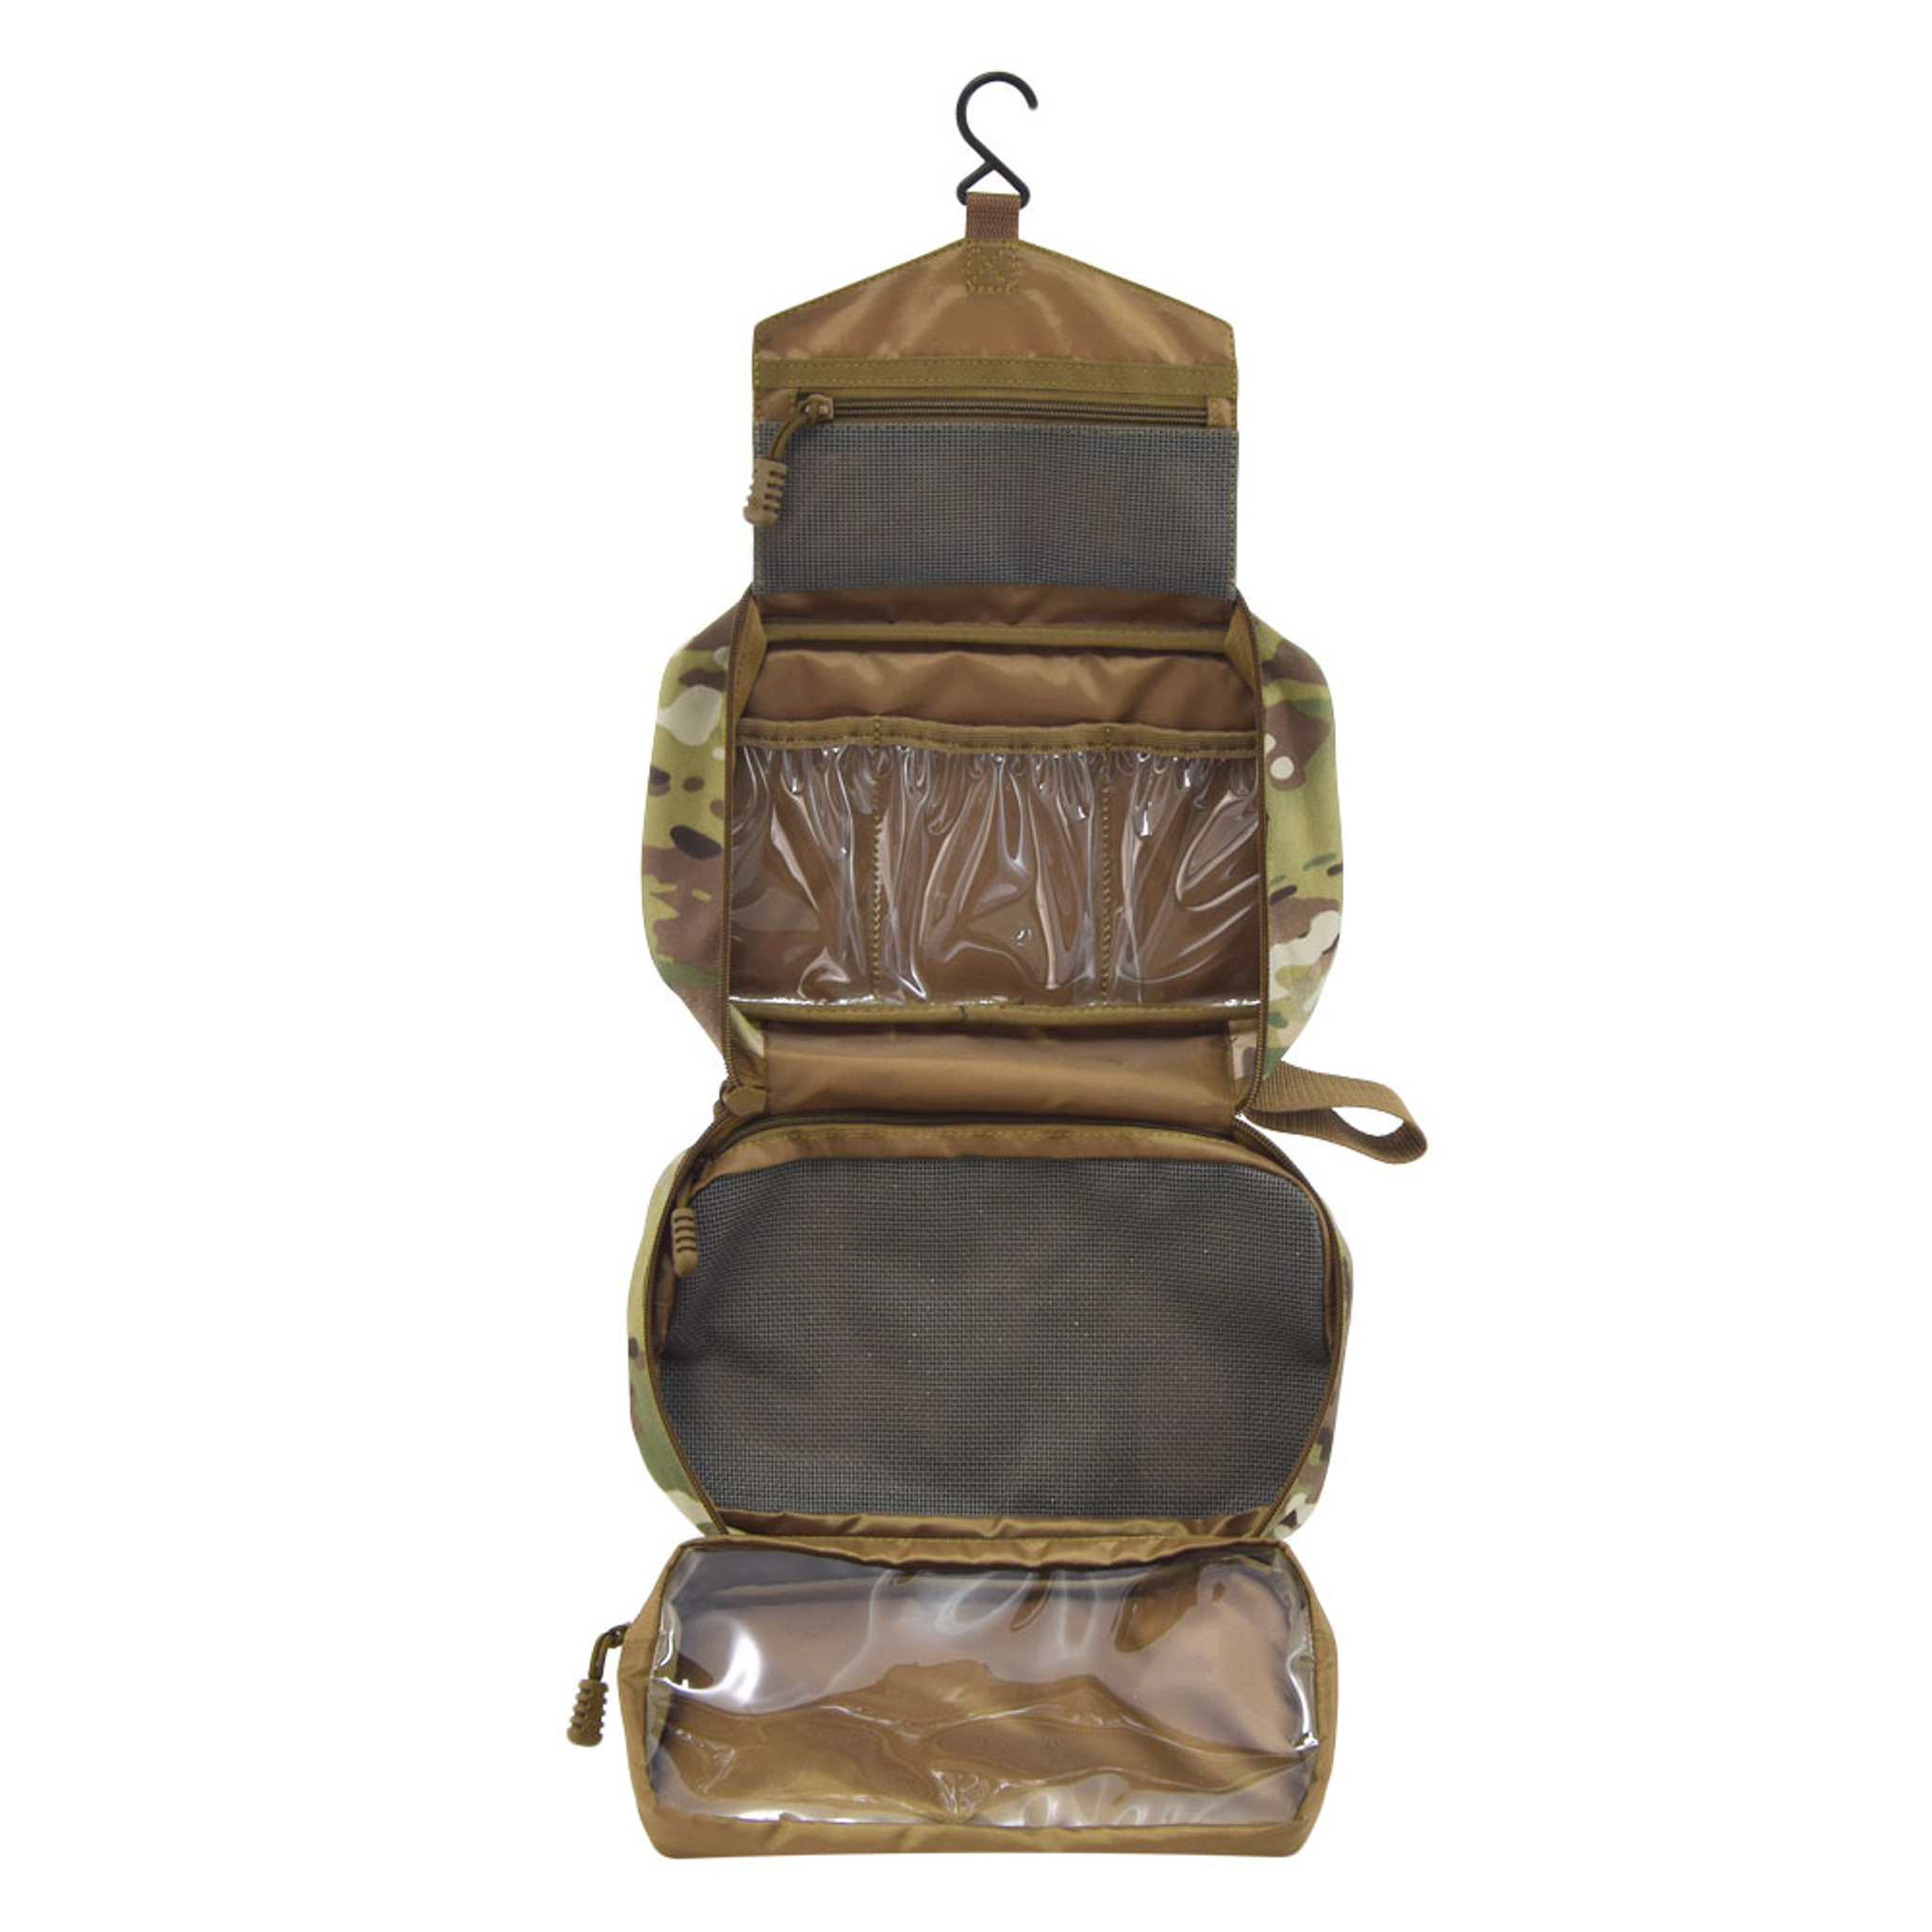 CONCHO HANGING TOILETRY BAG - Flying Circle Gear